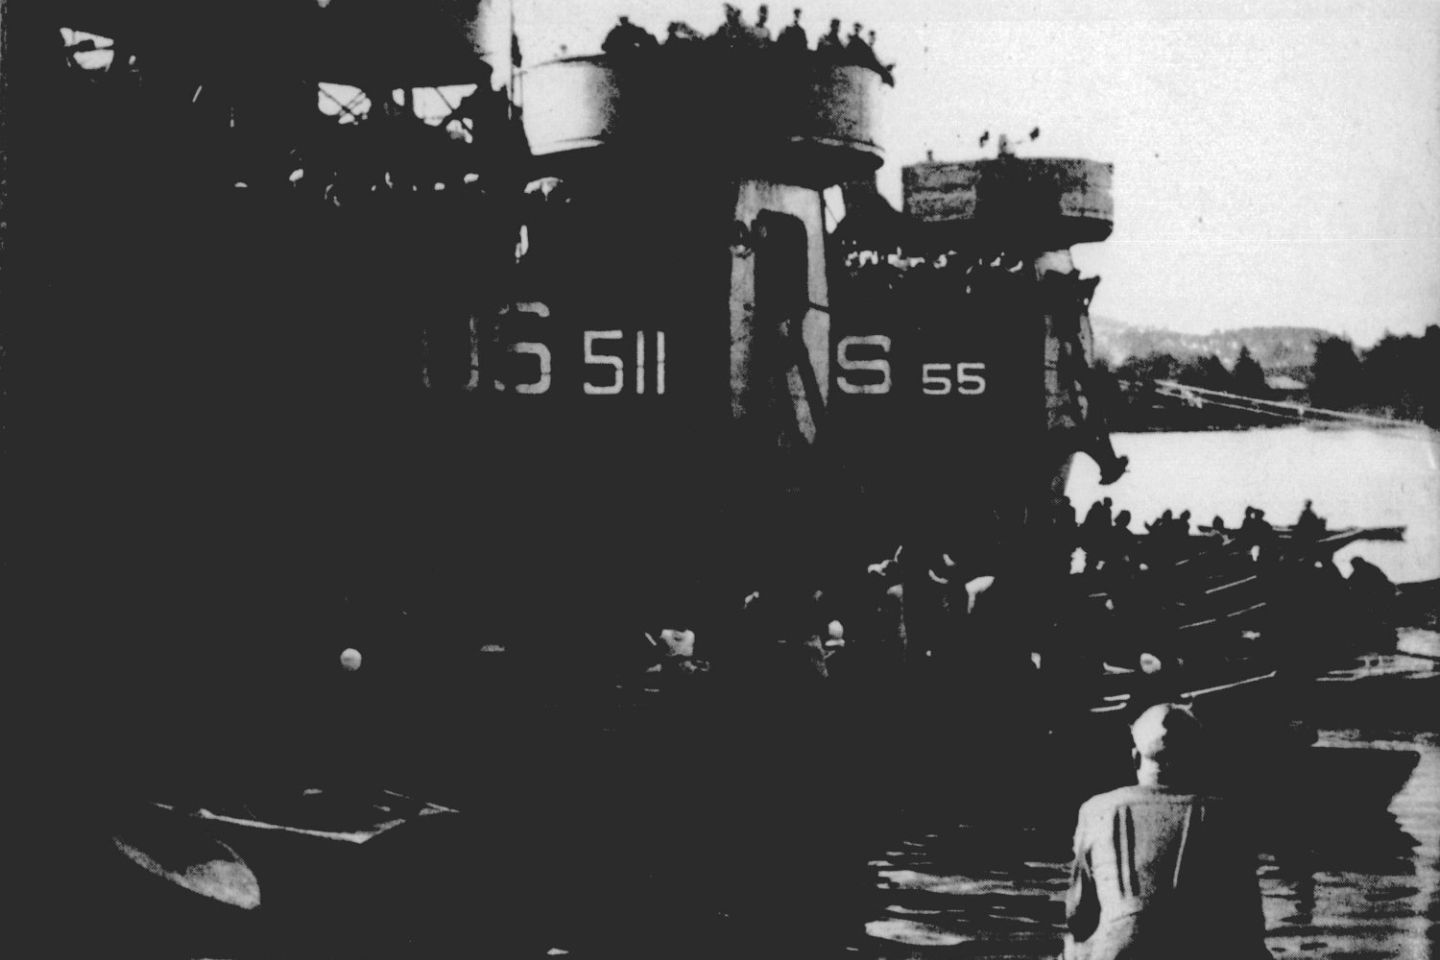 USS LST511 and USS LST55 at Drammensfjord, Norway, 4 June 1945.